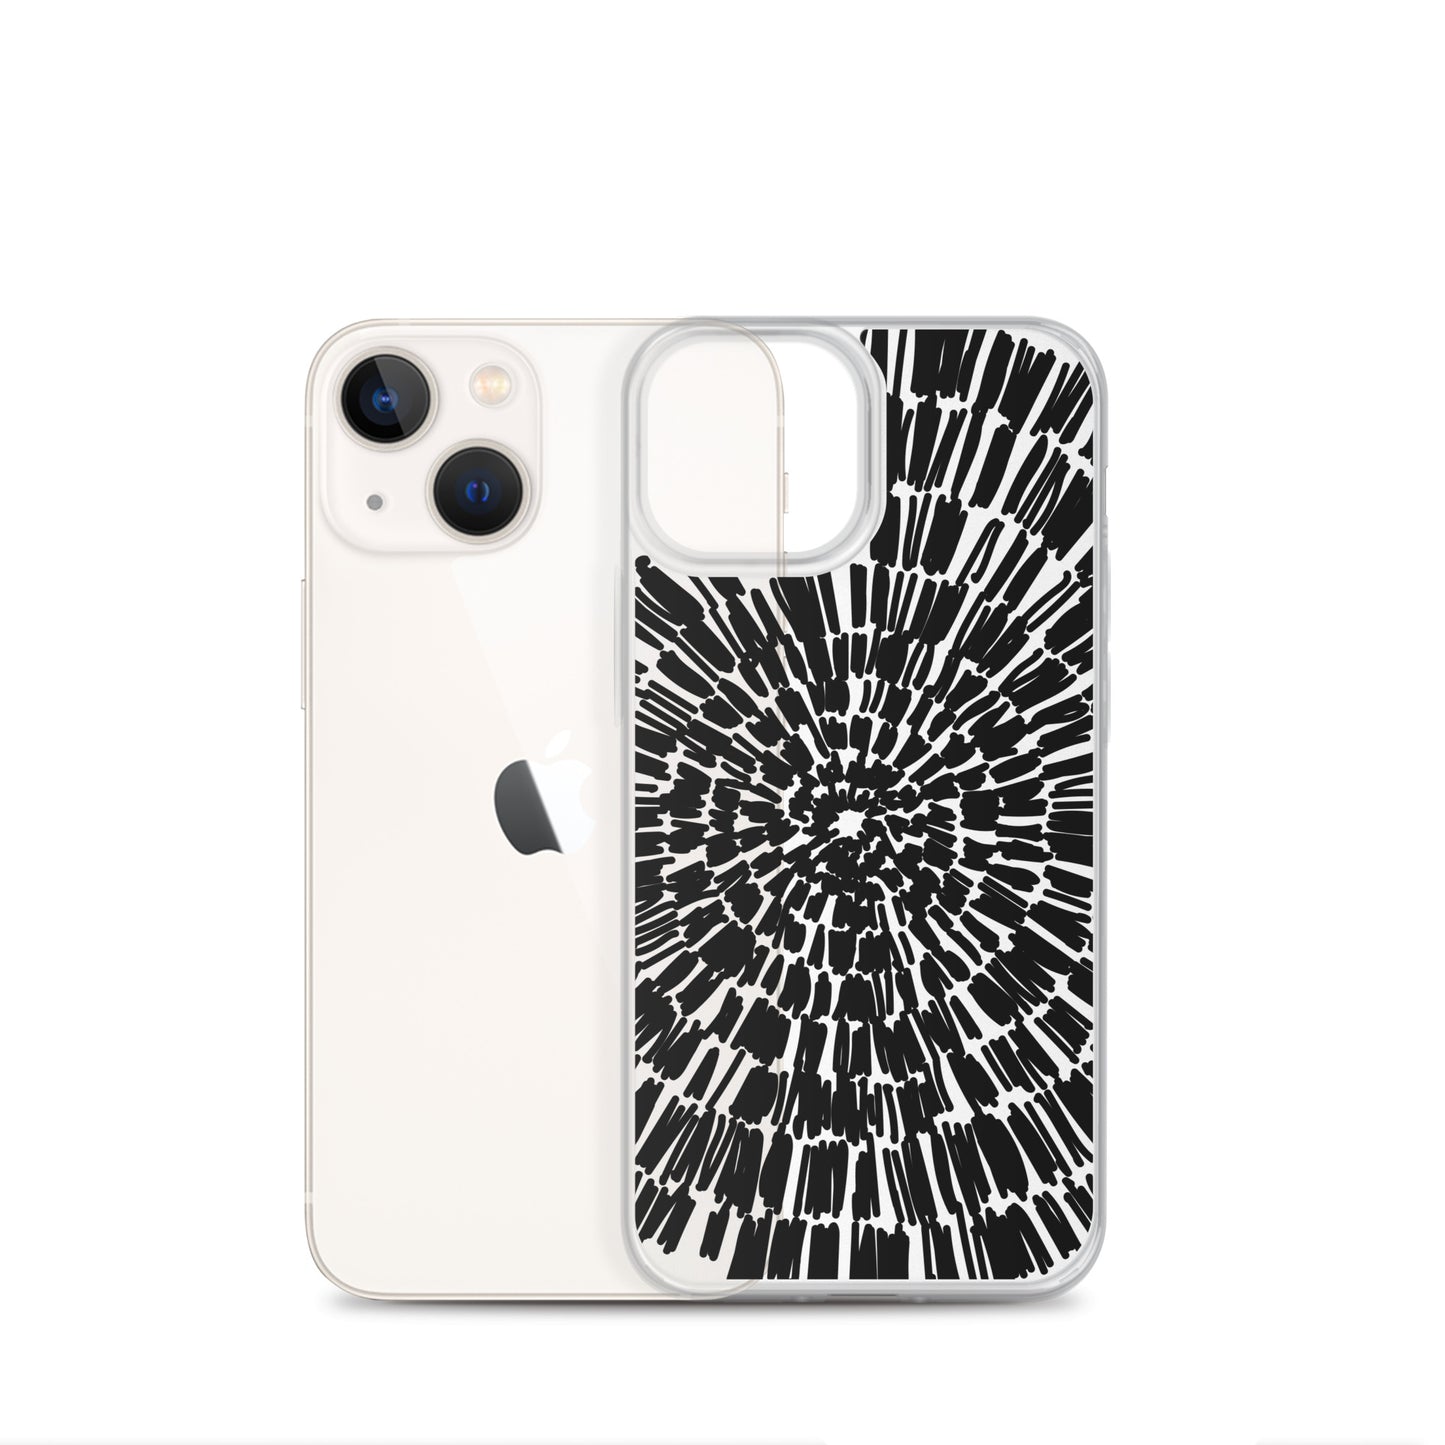 Black Abstract Composition iPhone Case